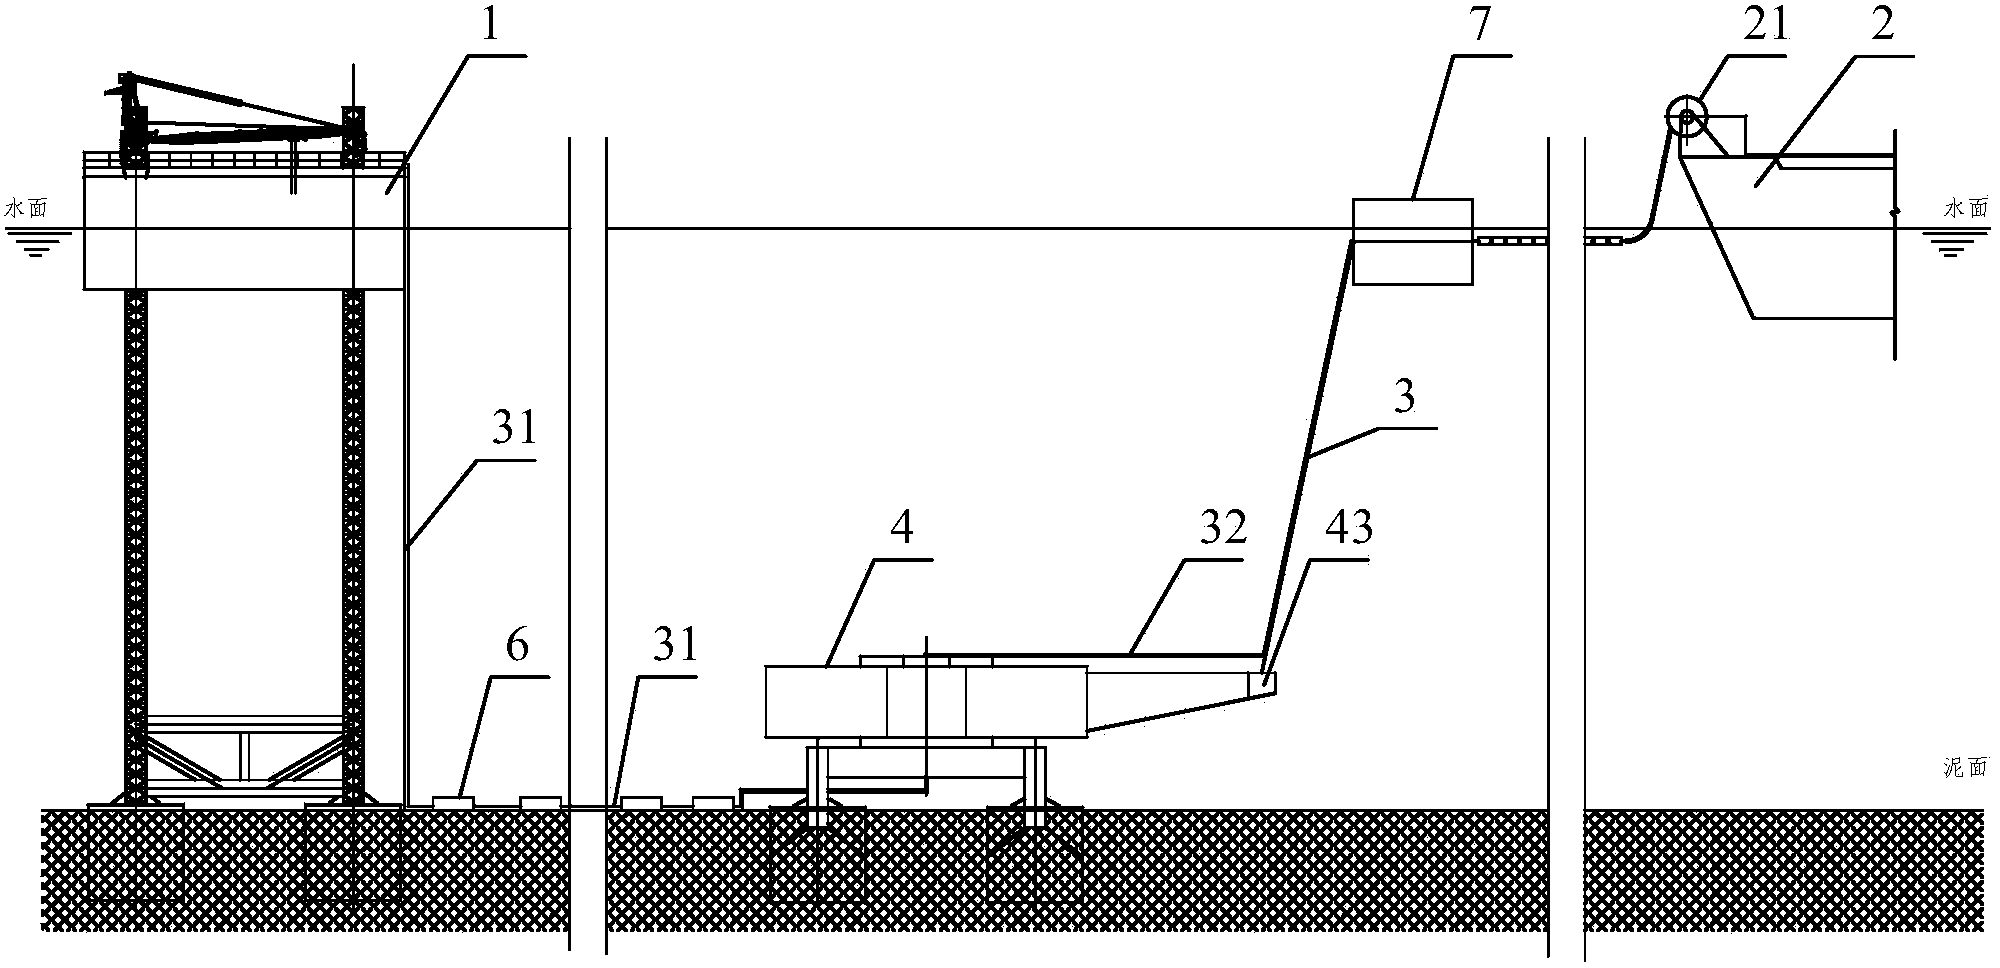 Light single point mooring outer output device